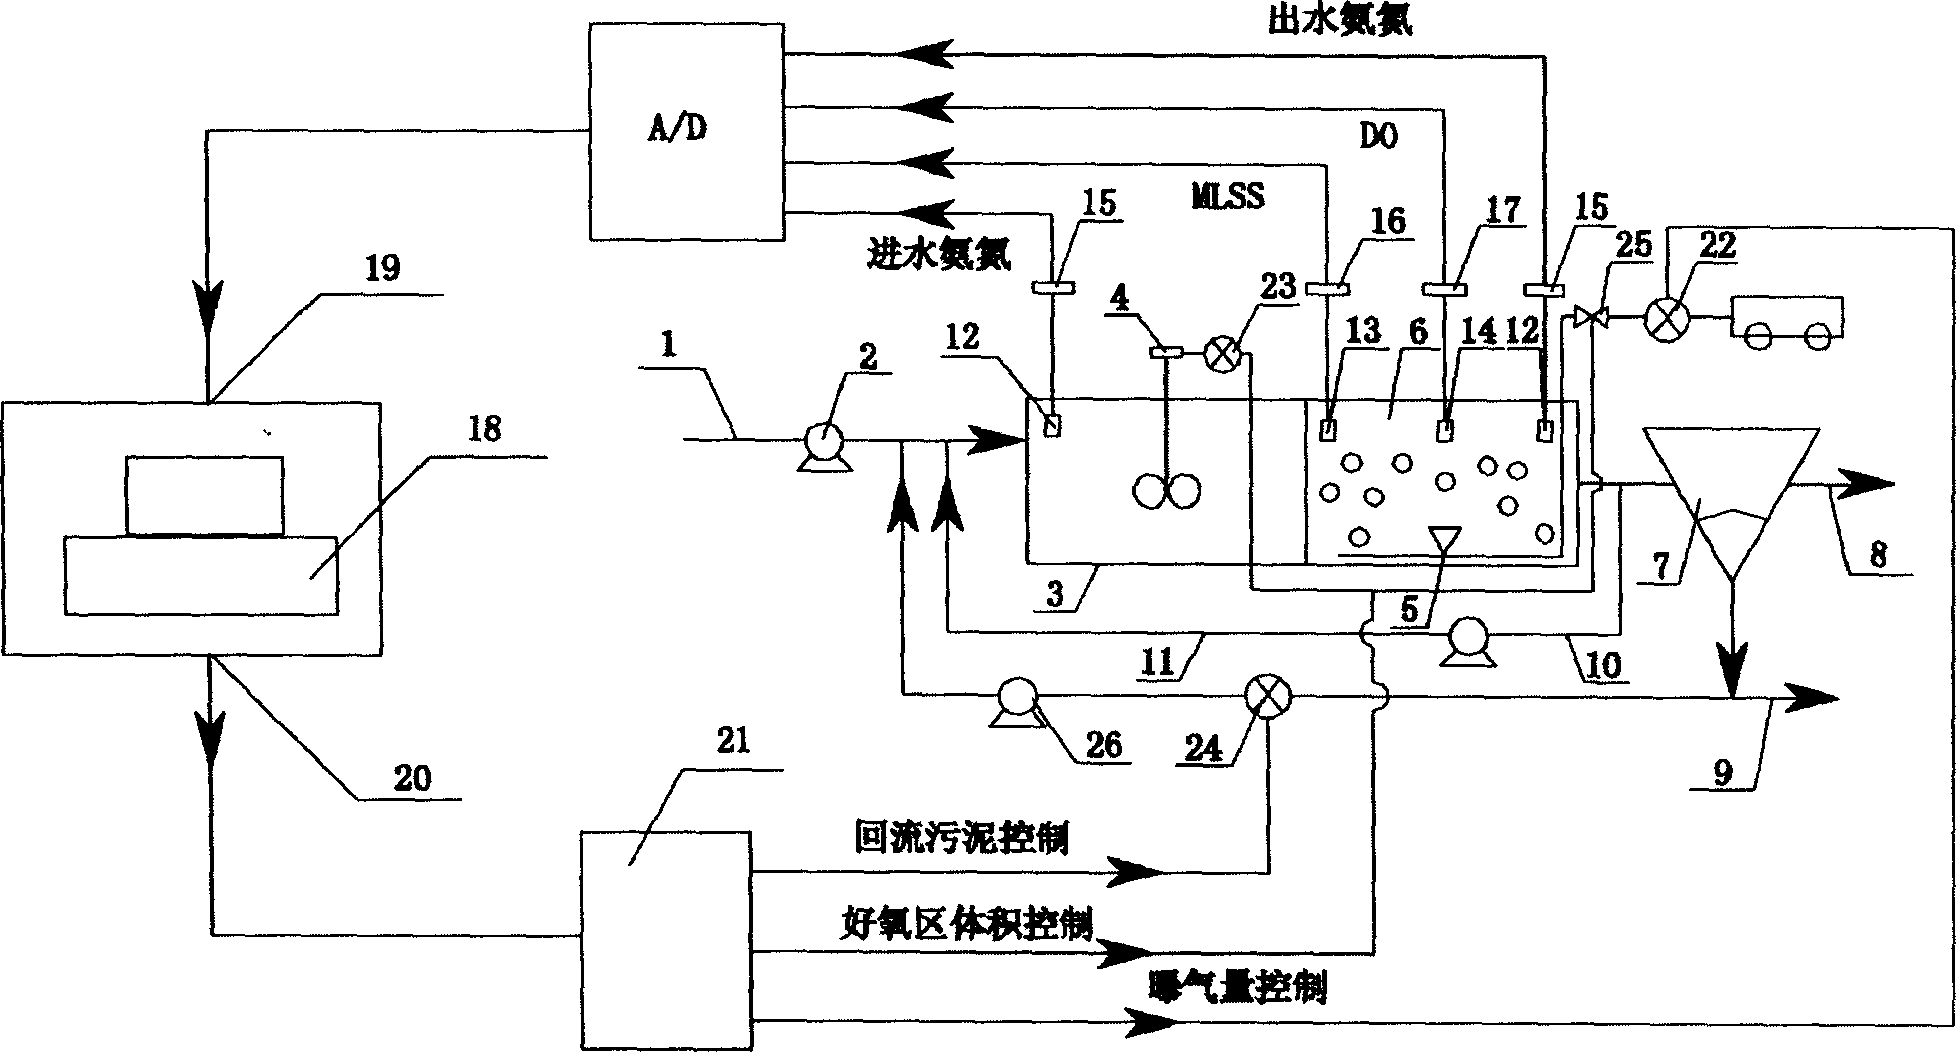 Adjusting method for A/O biological denitrification reactor and nitrification process, its on-line fuzzy controller and control thereof